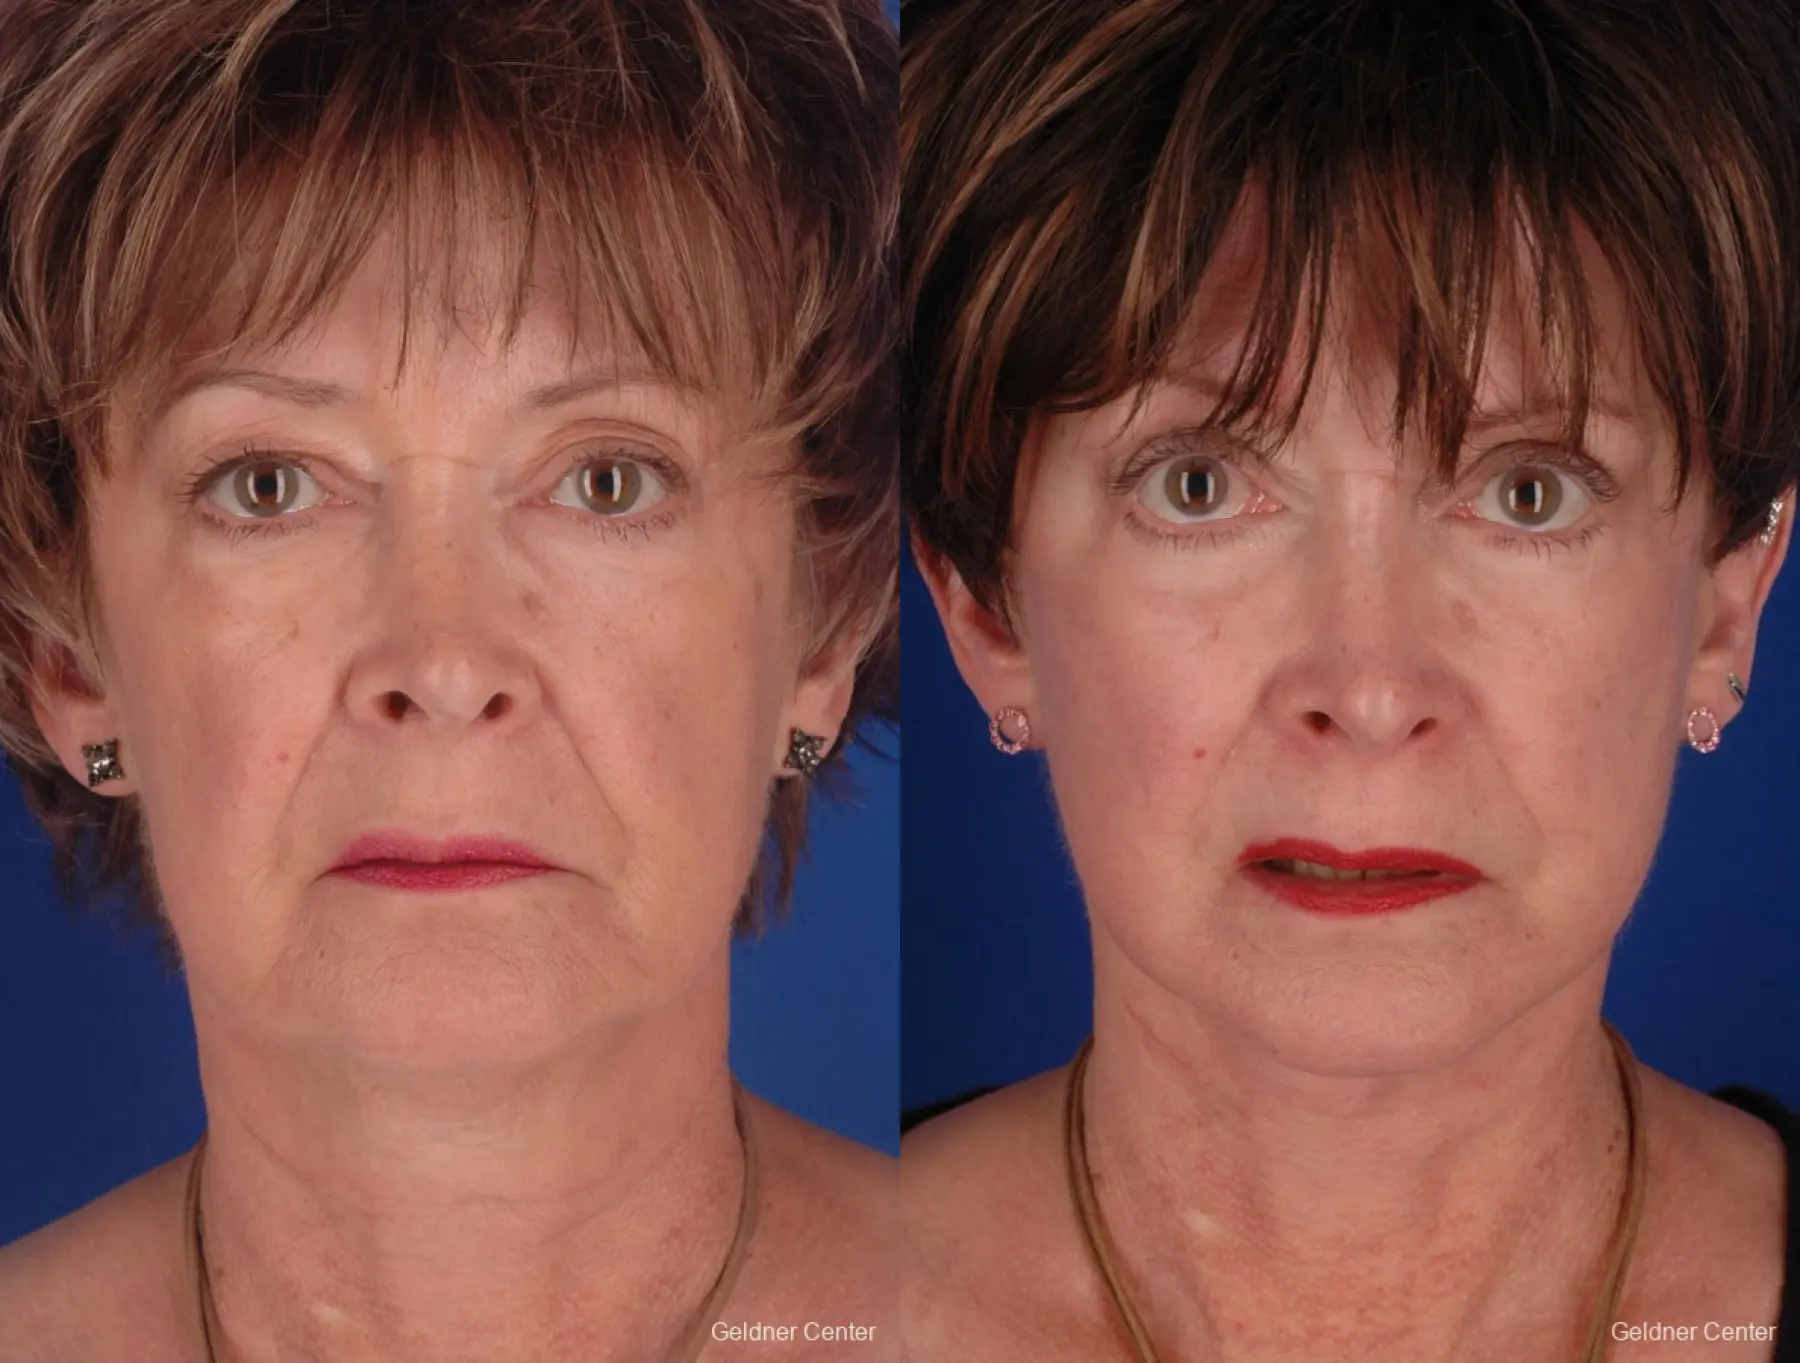 59 year old woman, facelift - Before and After